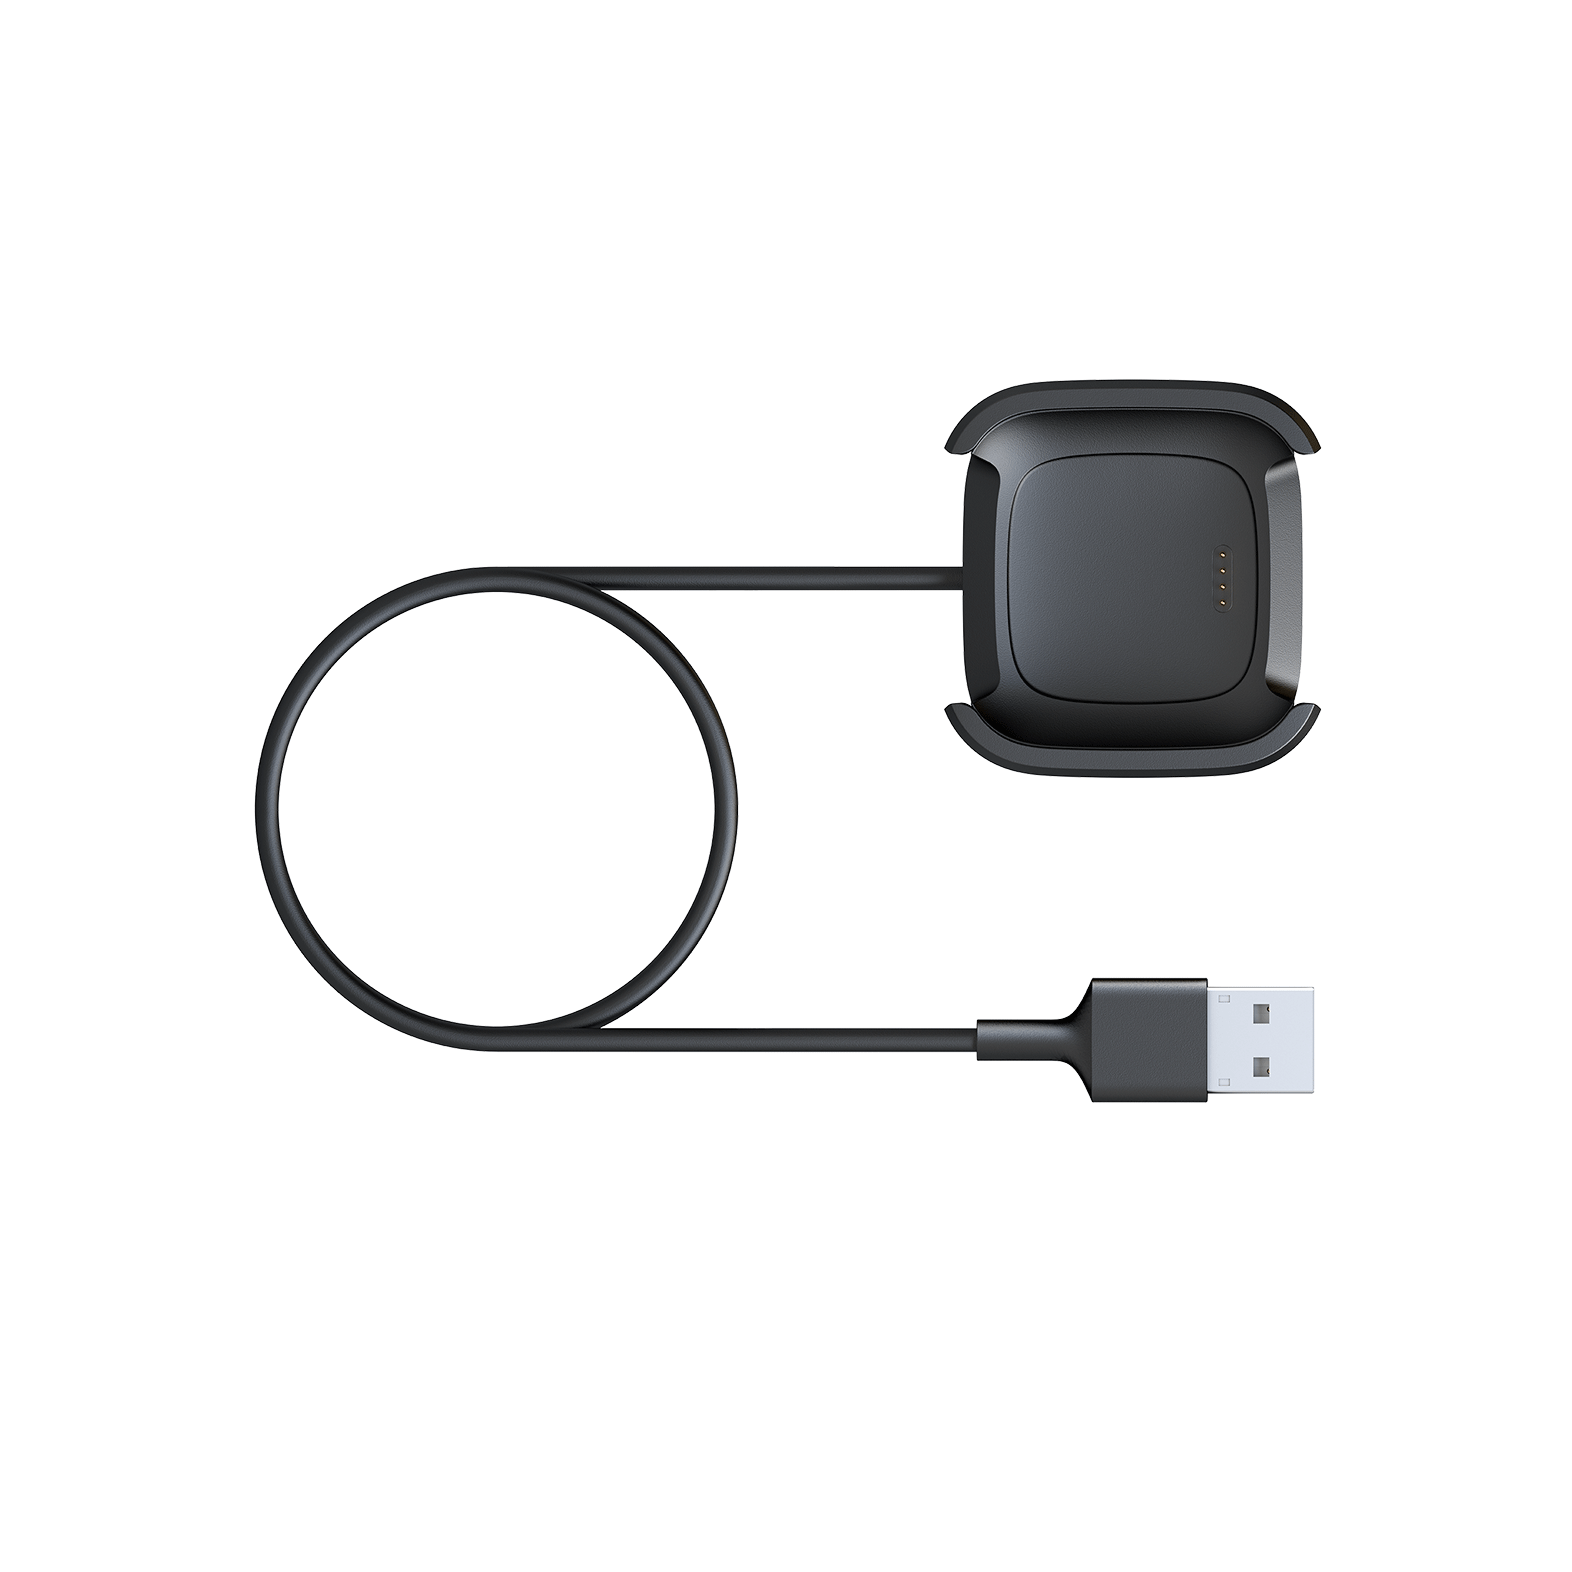 Charger for Fitbit Versa Charging Station with 95cm Replacement Charge Cable 